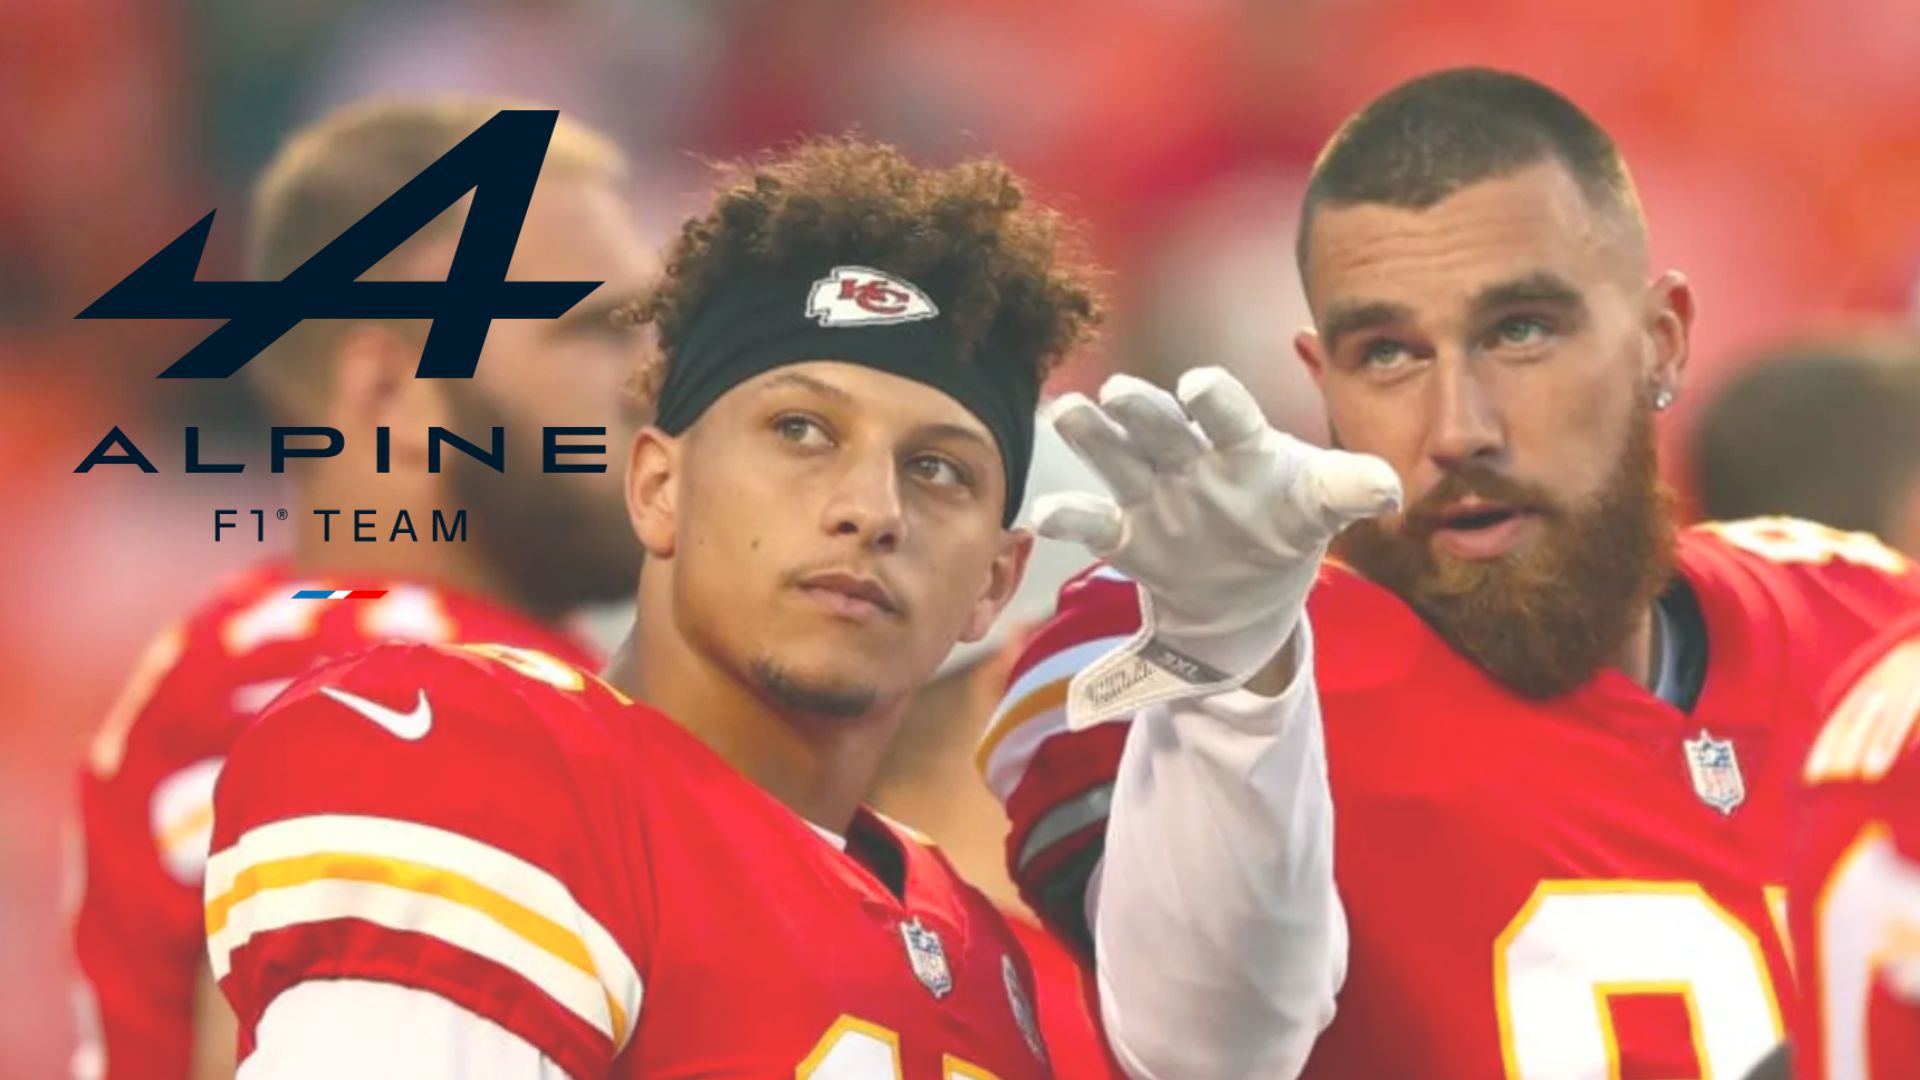 Chiefs Travis Kelce and Patrick Mahomes Invest in Alpine’s F1 Fund